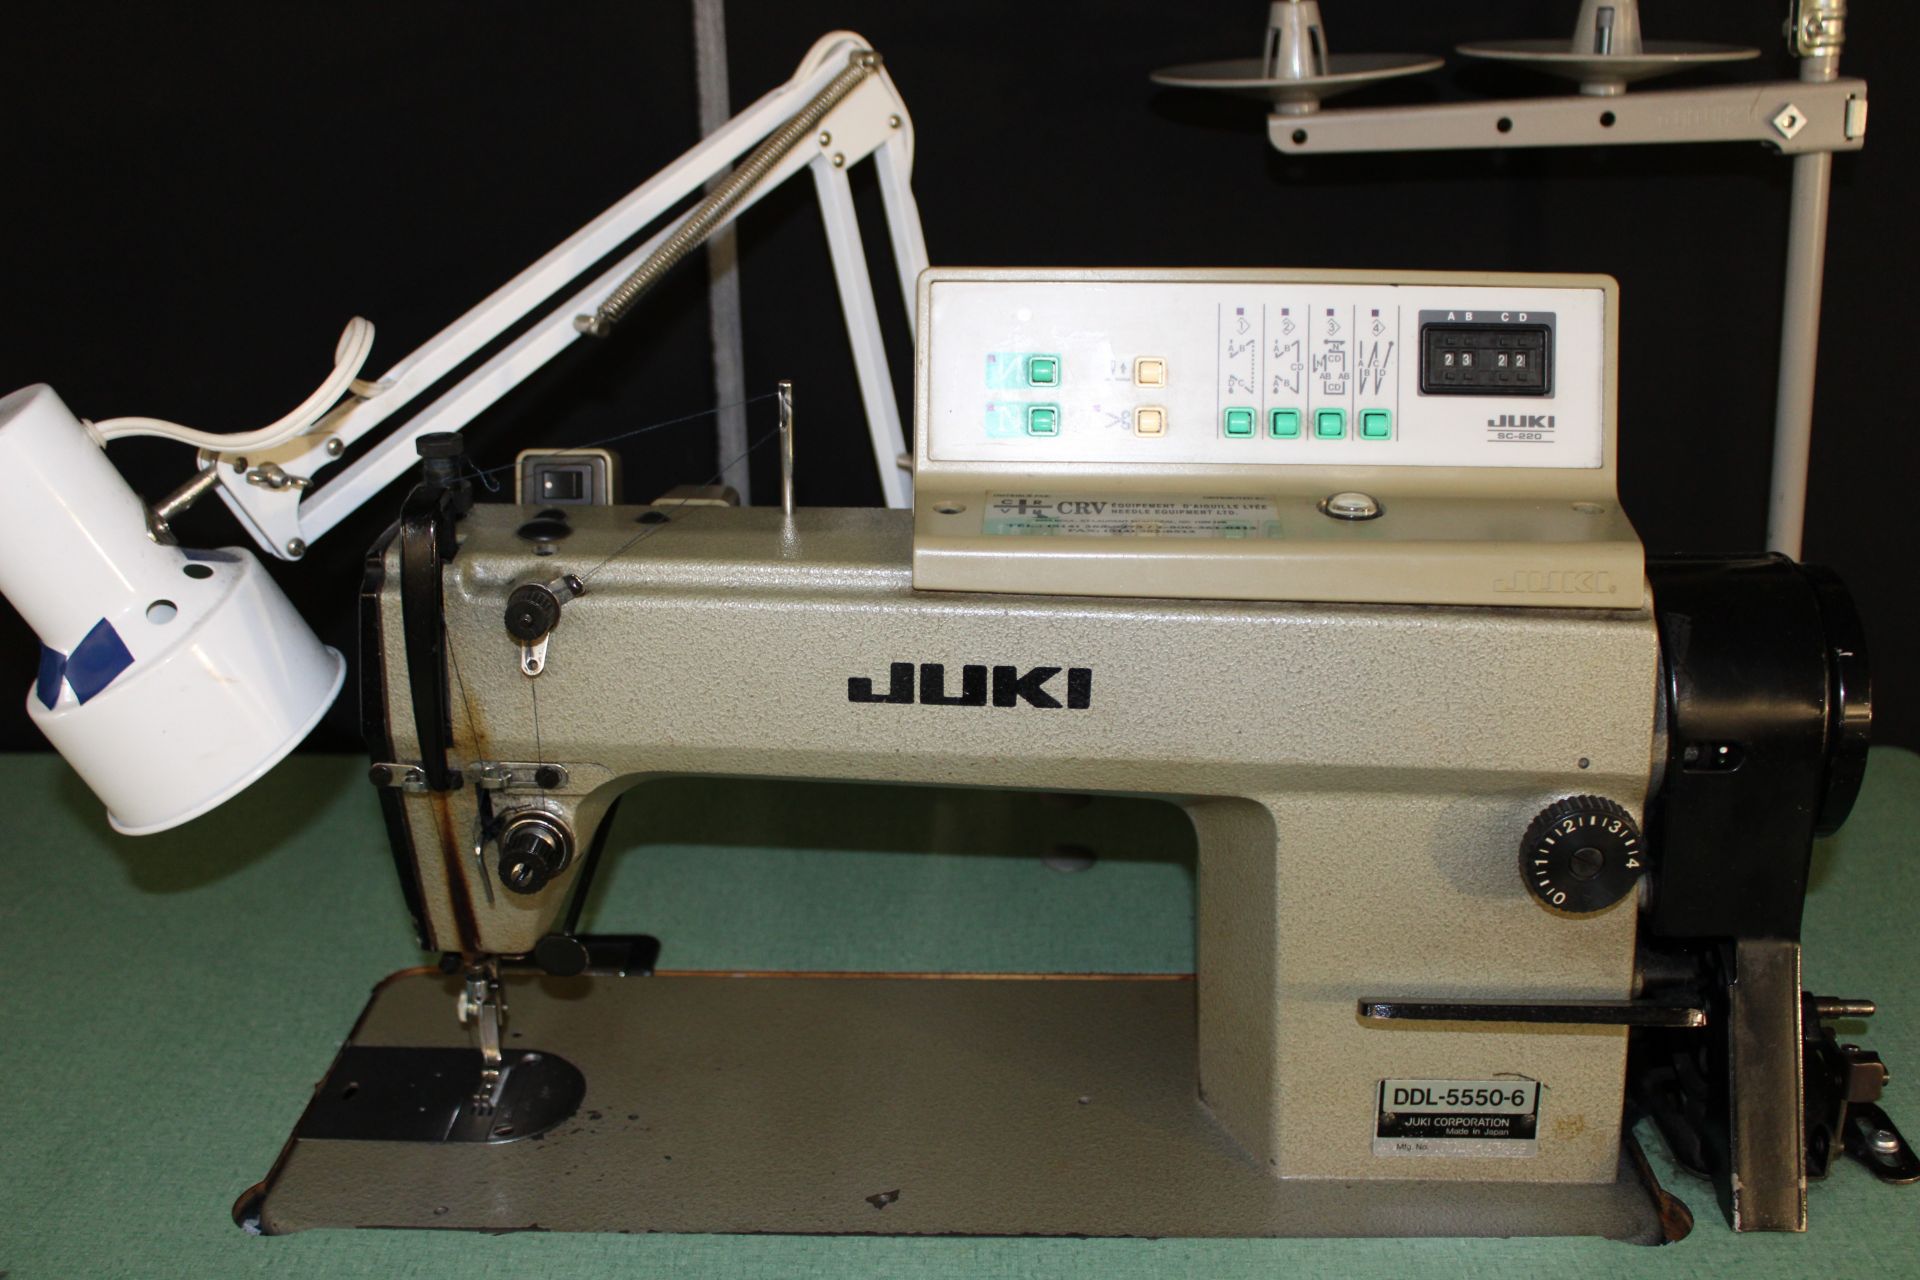 JUKI mod. DDL-5550-6, SC-220, industrial sewing machine, 110V, P/T/FOOT LIFT, Stand Up - Image 3 of 5